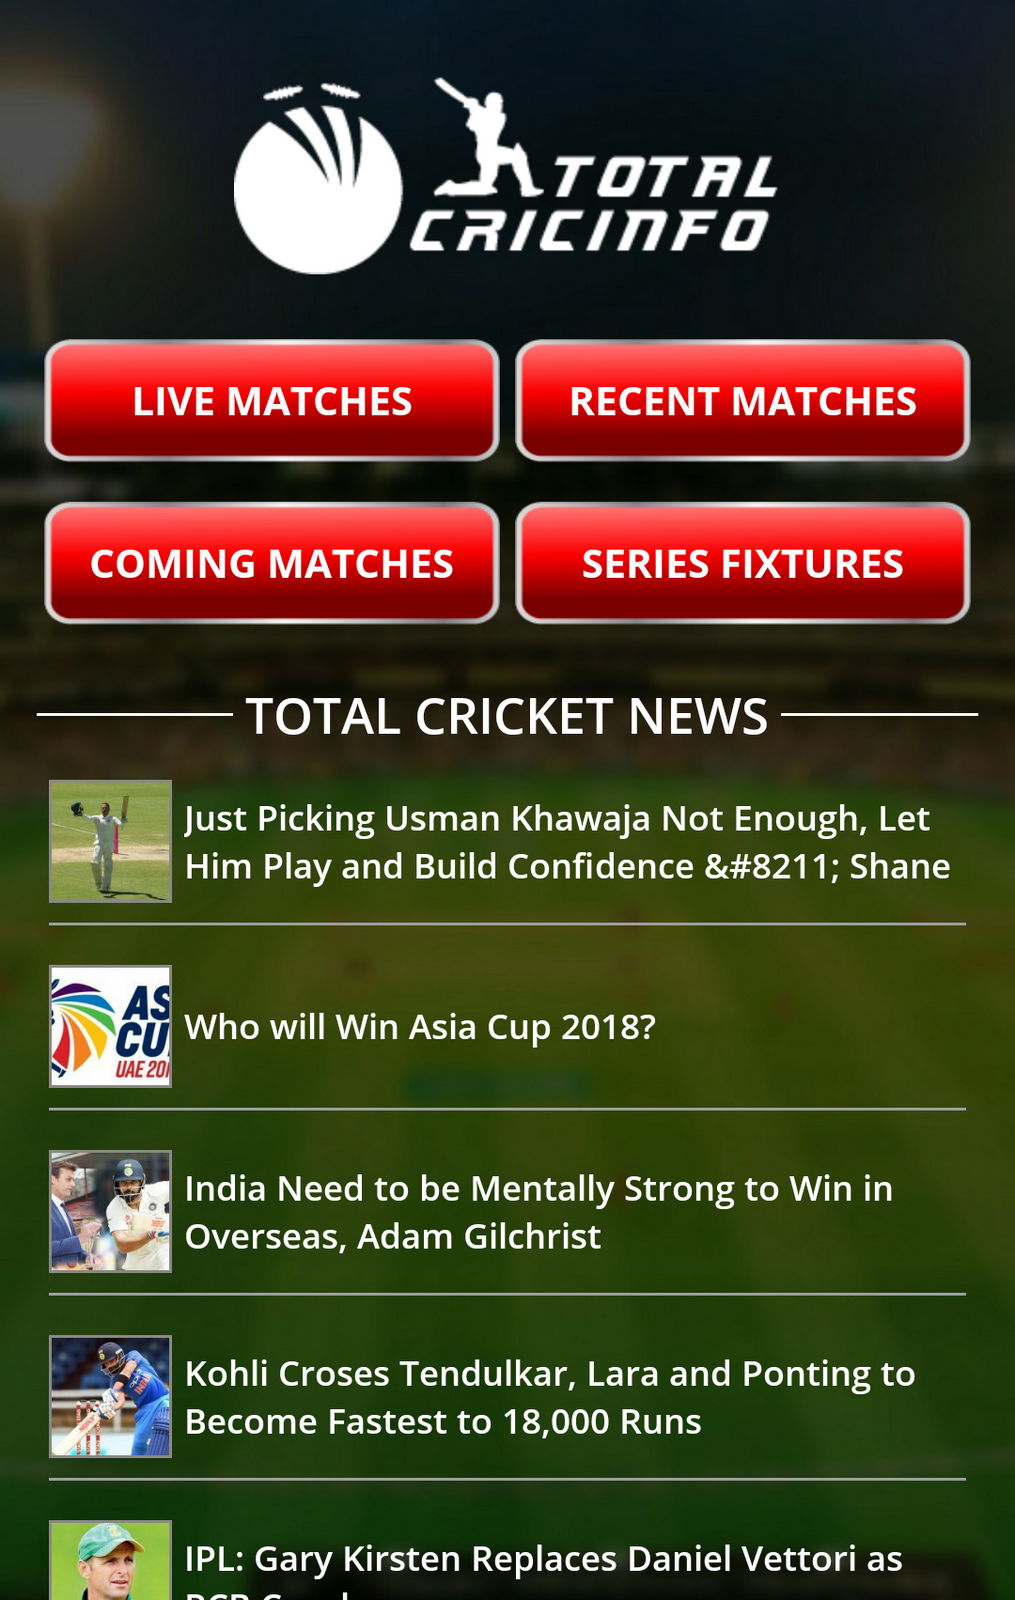 T20 WC Live Cricket Score Updates -Total Cricinfo Android Game APK (com.totalcricinfo.pc.myapplication) by Total Cricinfo